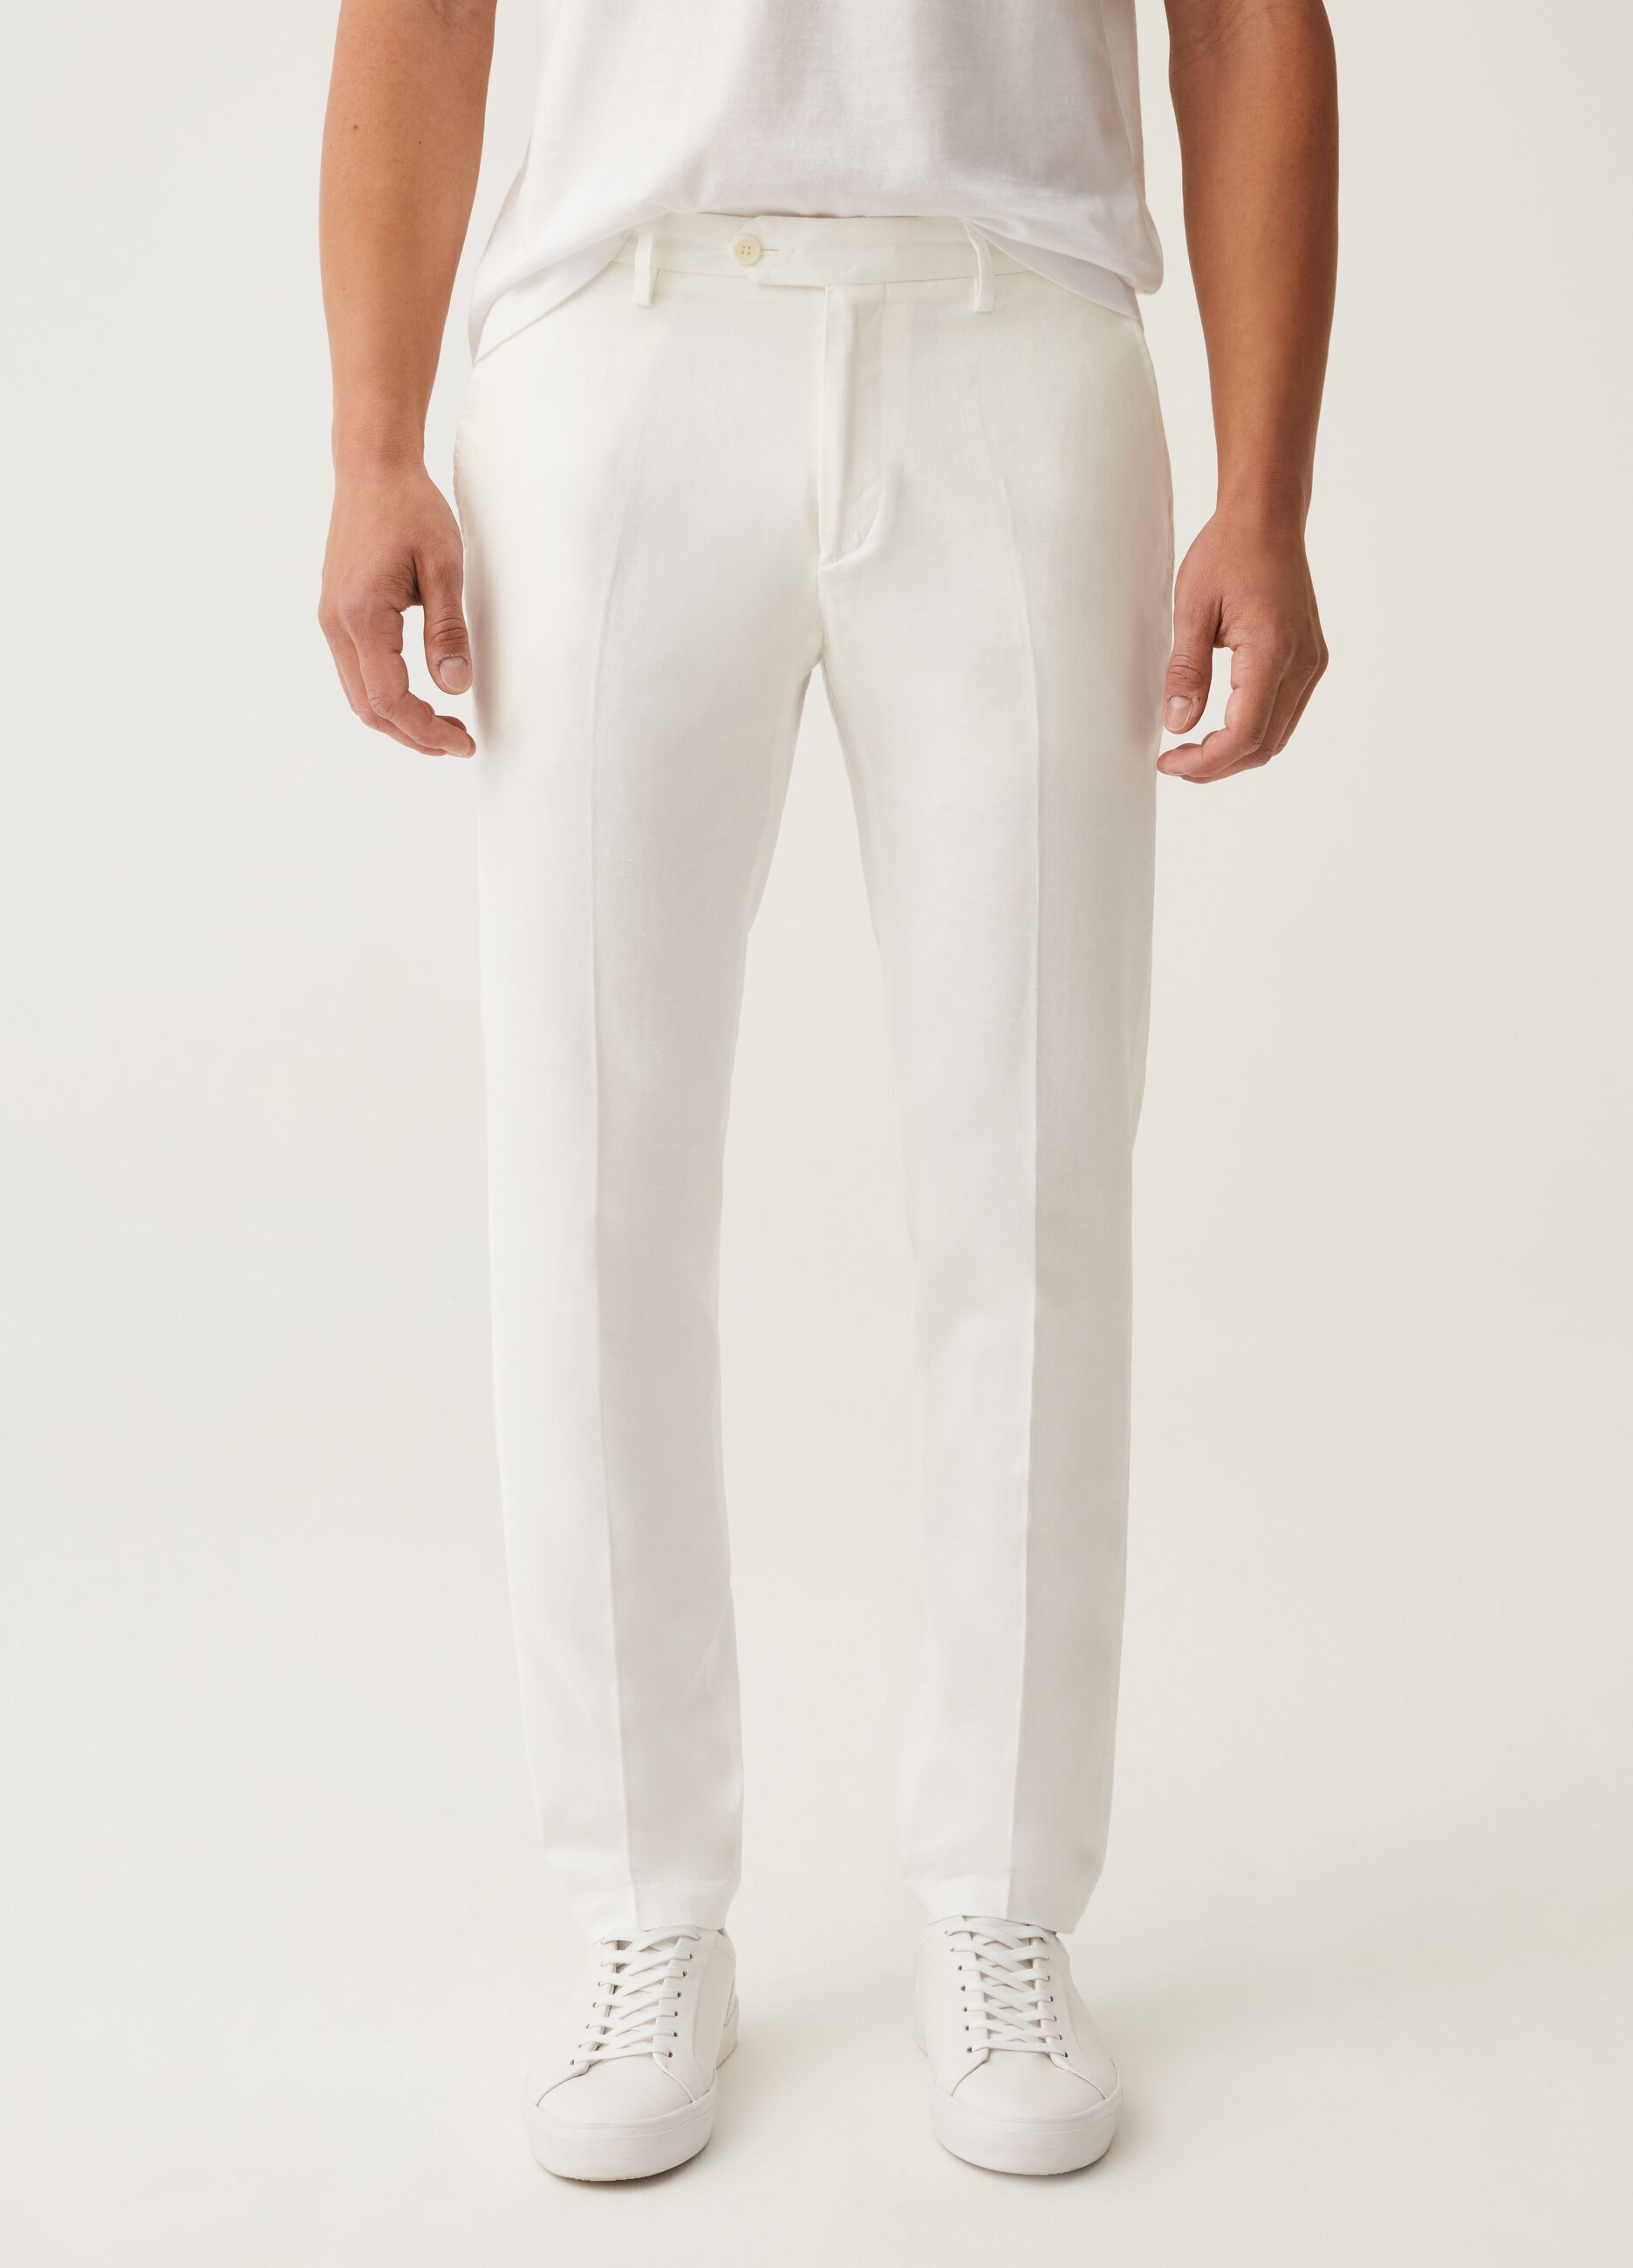 Slim-fit chinos in white cotton and linen